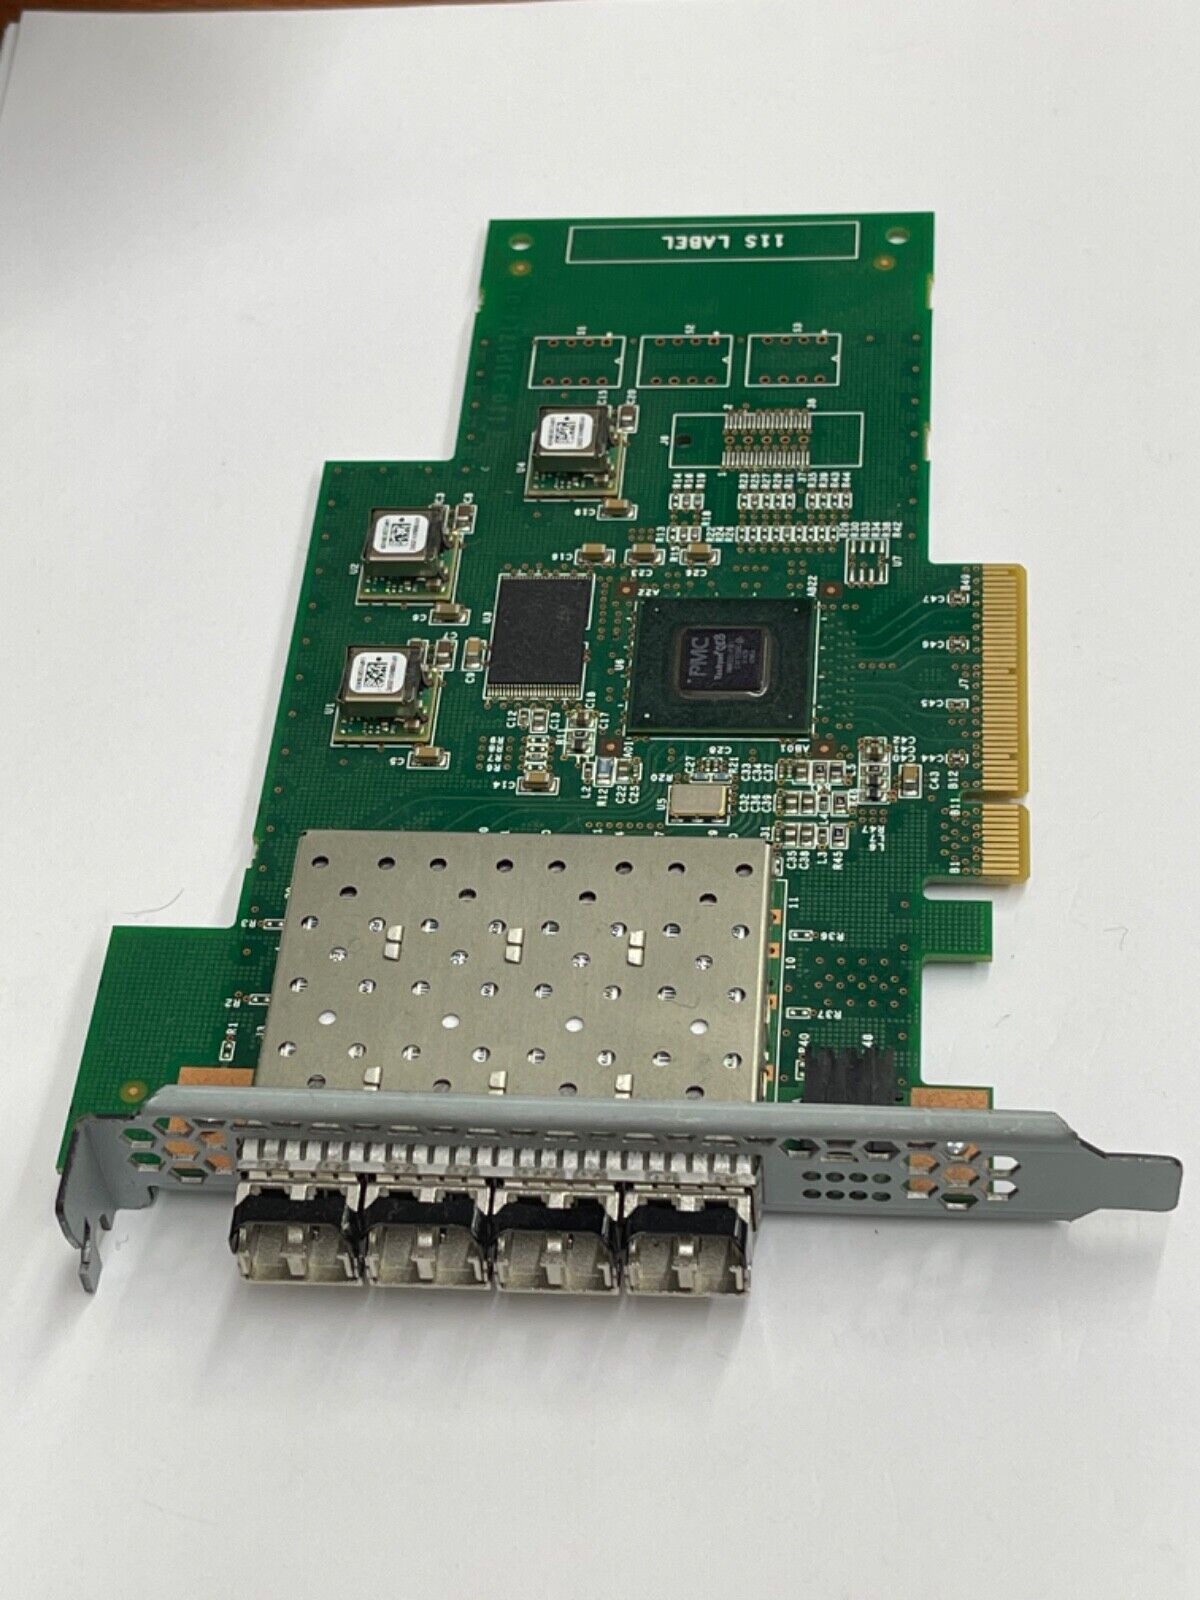 IBM 31P1811 31P1630 2145-DH8 4-PORT PCI Fiber Channel Card. With Transceivers